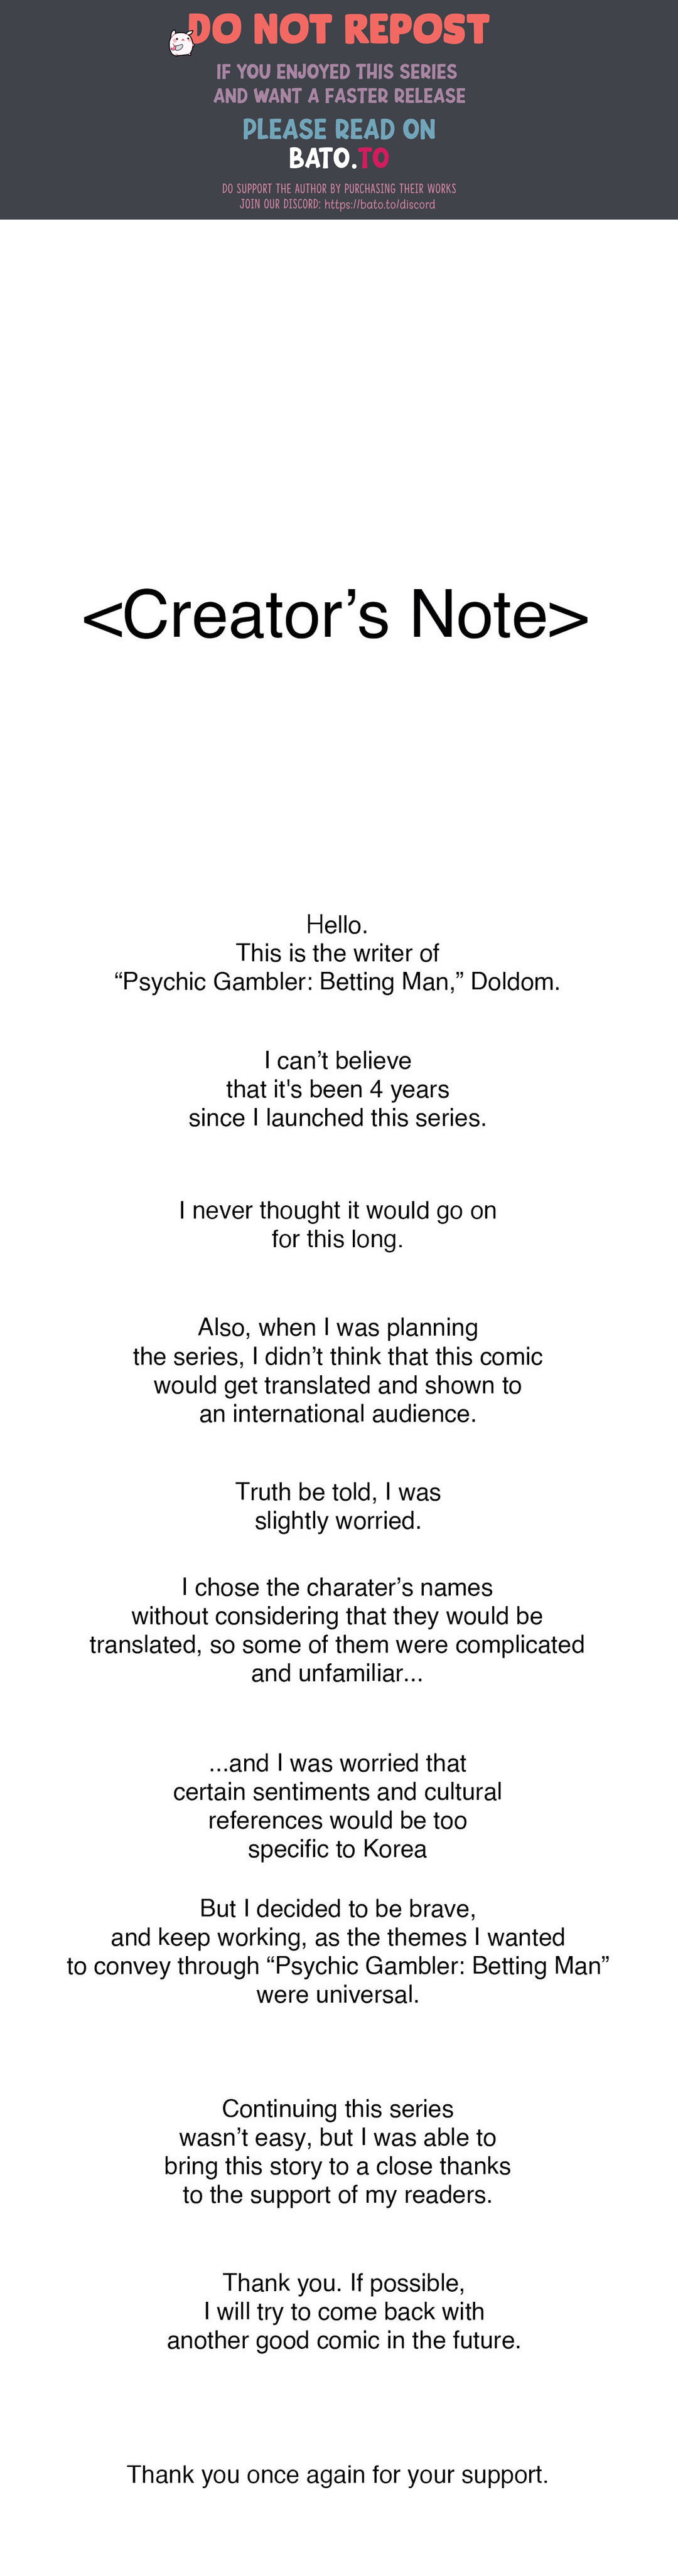 Psychic Gambler: Betting Man Chapter 198.5 : Creator's Note - Picture 1